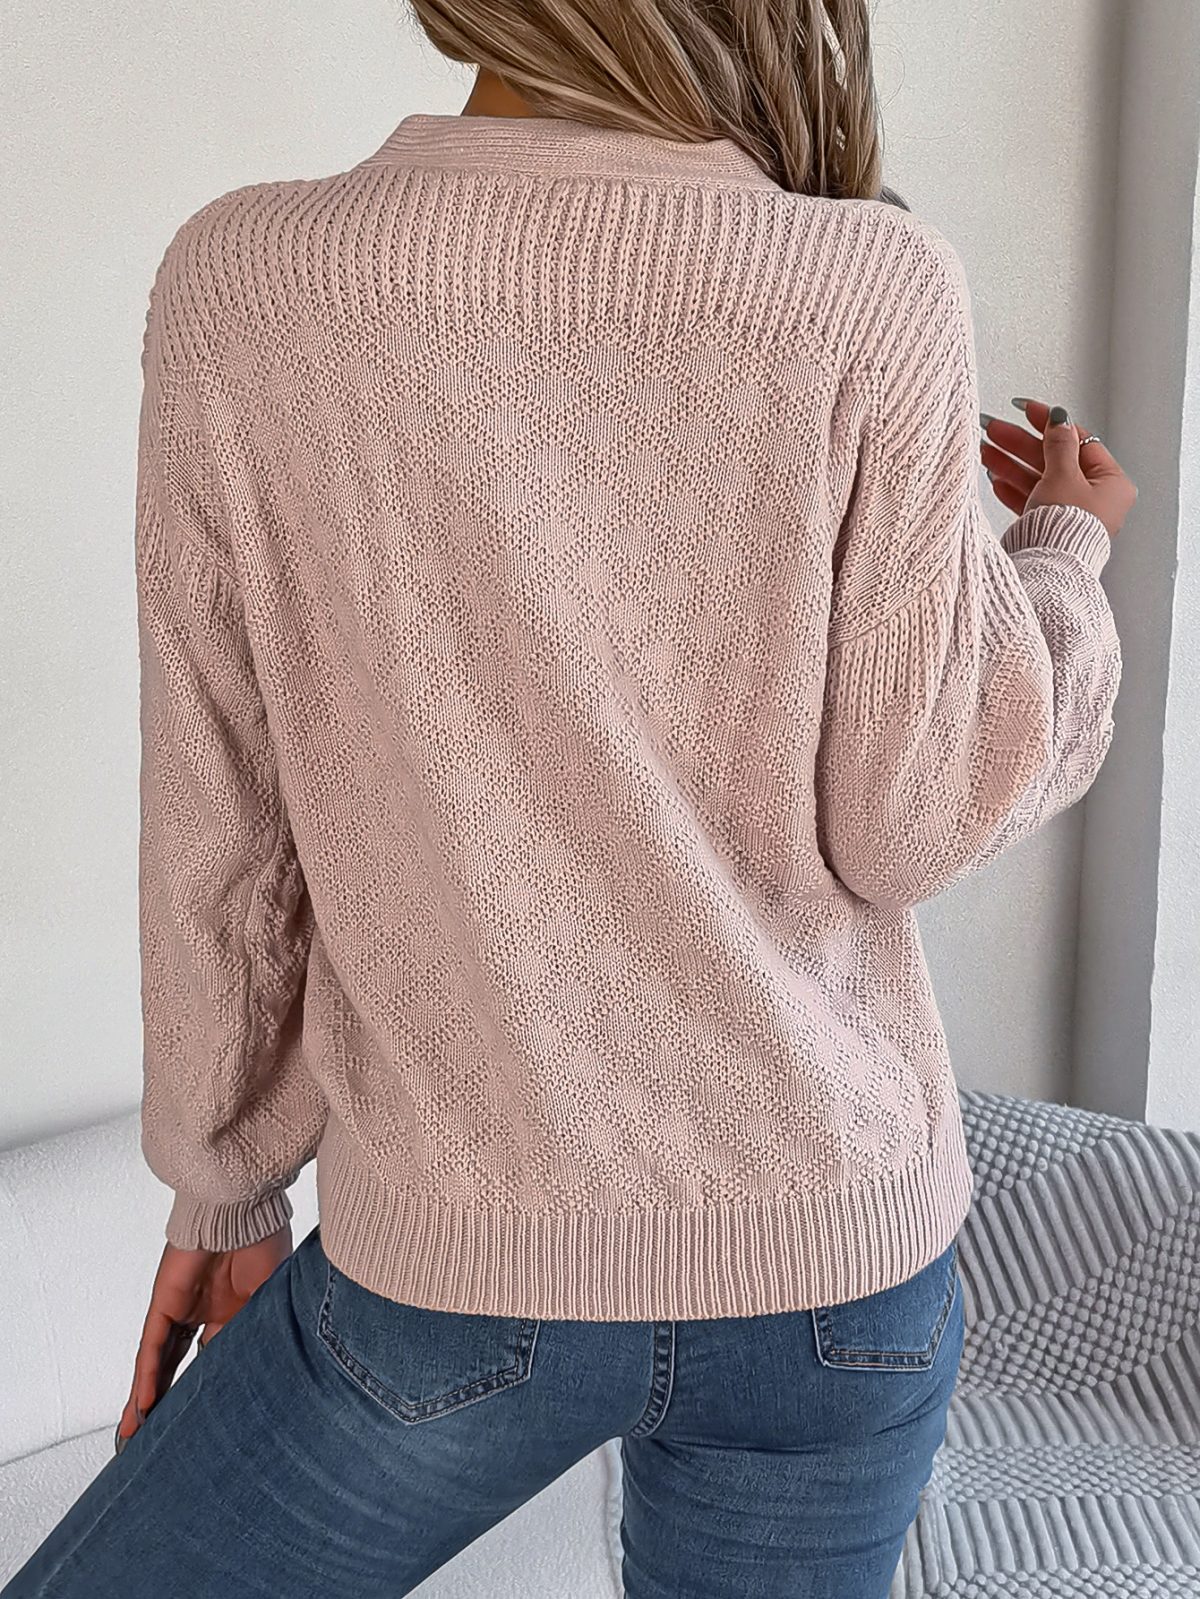 Autumn Winter Casual Loose V neck Buttons Lantern Sleeve Pullover Sweater in Sweaters